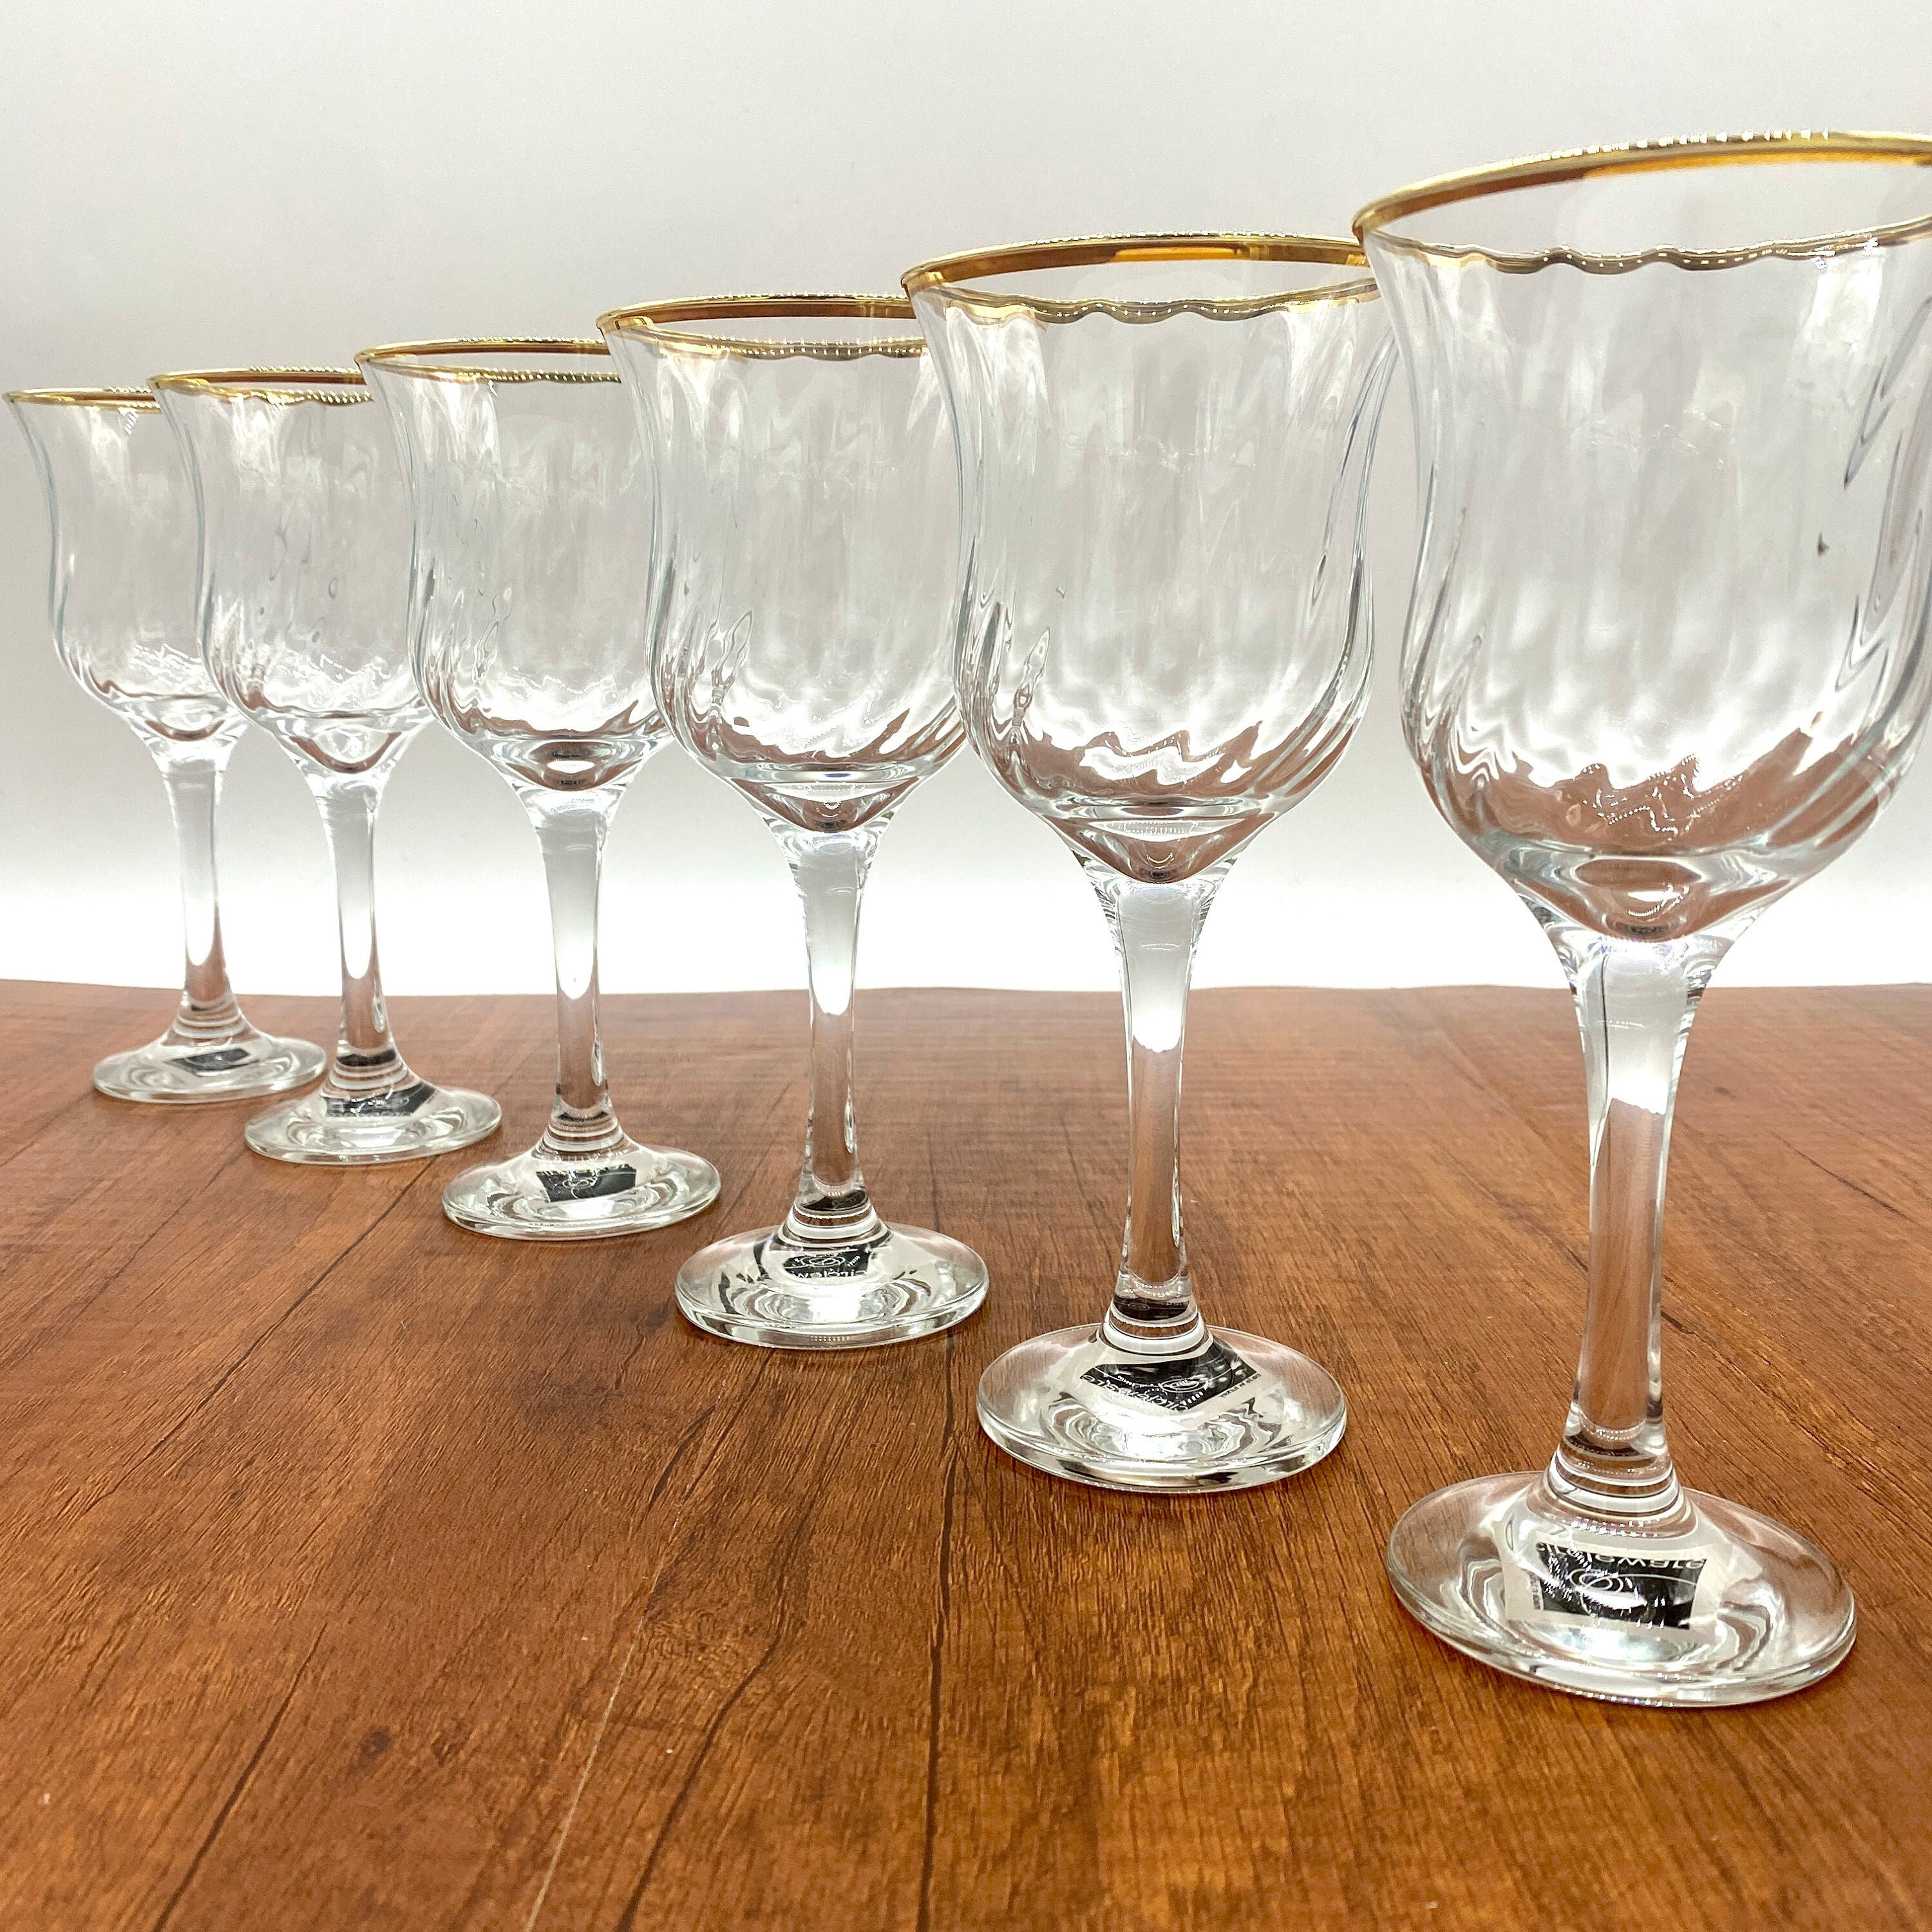 Gold Wine Glasses, Unique Wine Glasses, Ripple Wine Glass Set, Barware Set,  Unique Barware, Glasses, Gifts For Her, Wedding Gift, Christmas